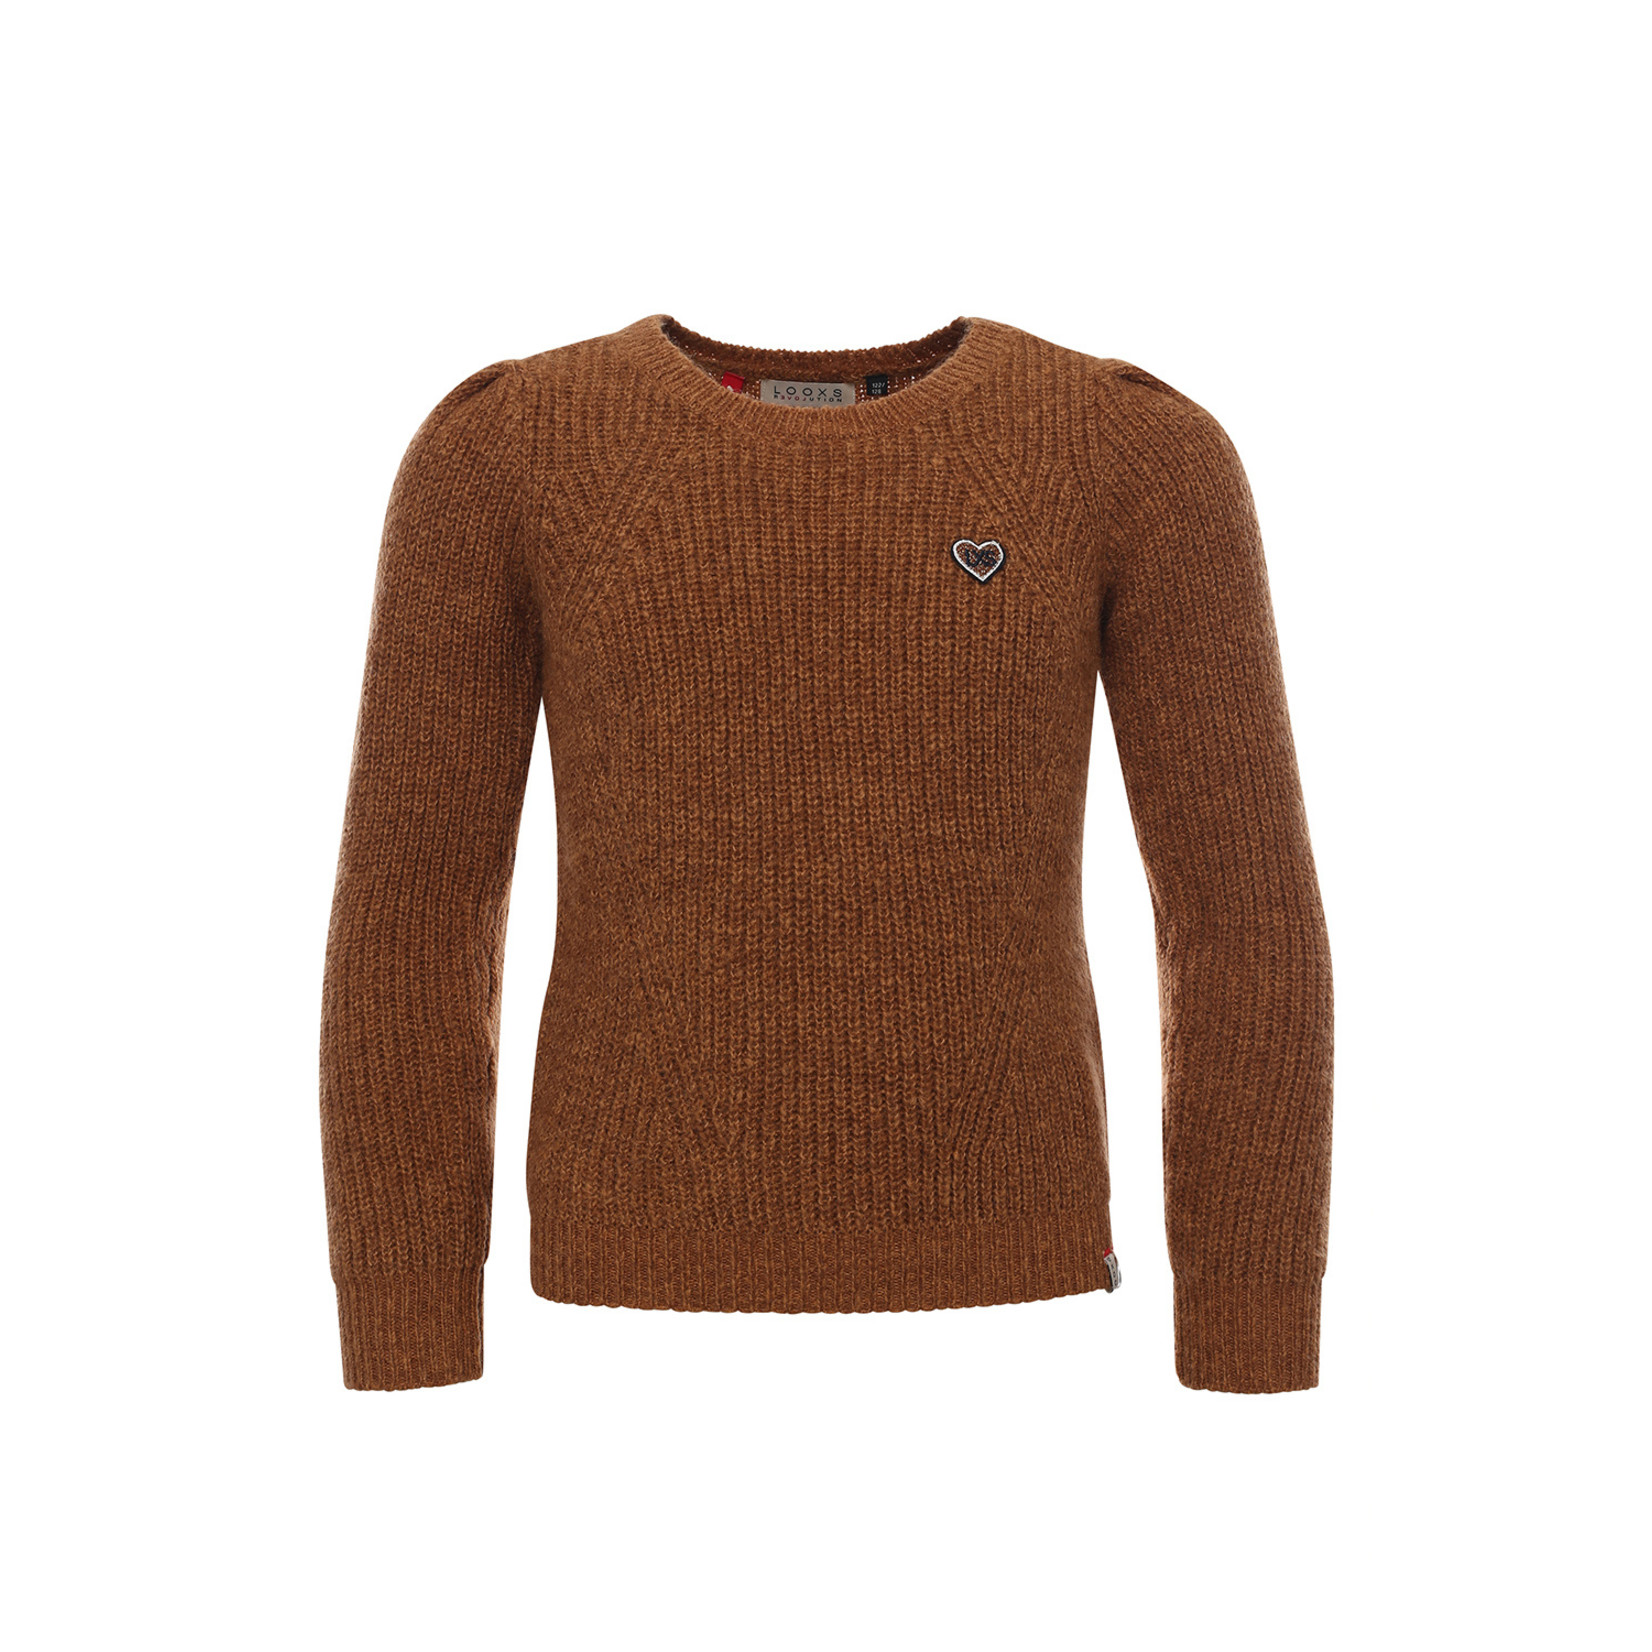 LOOXS Little Little knitted pullover Browny